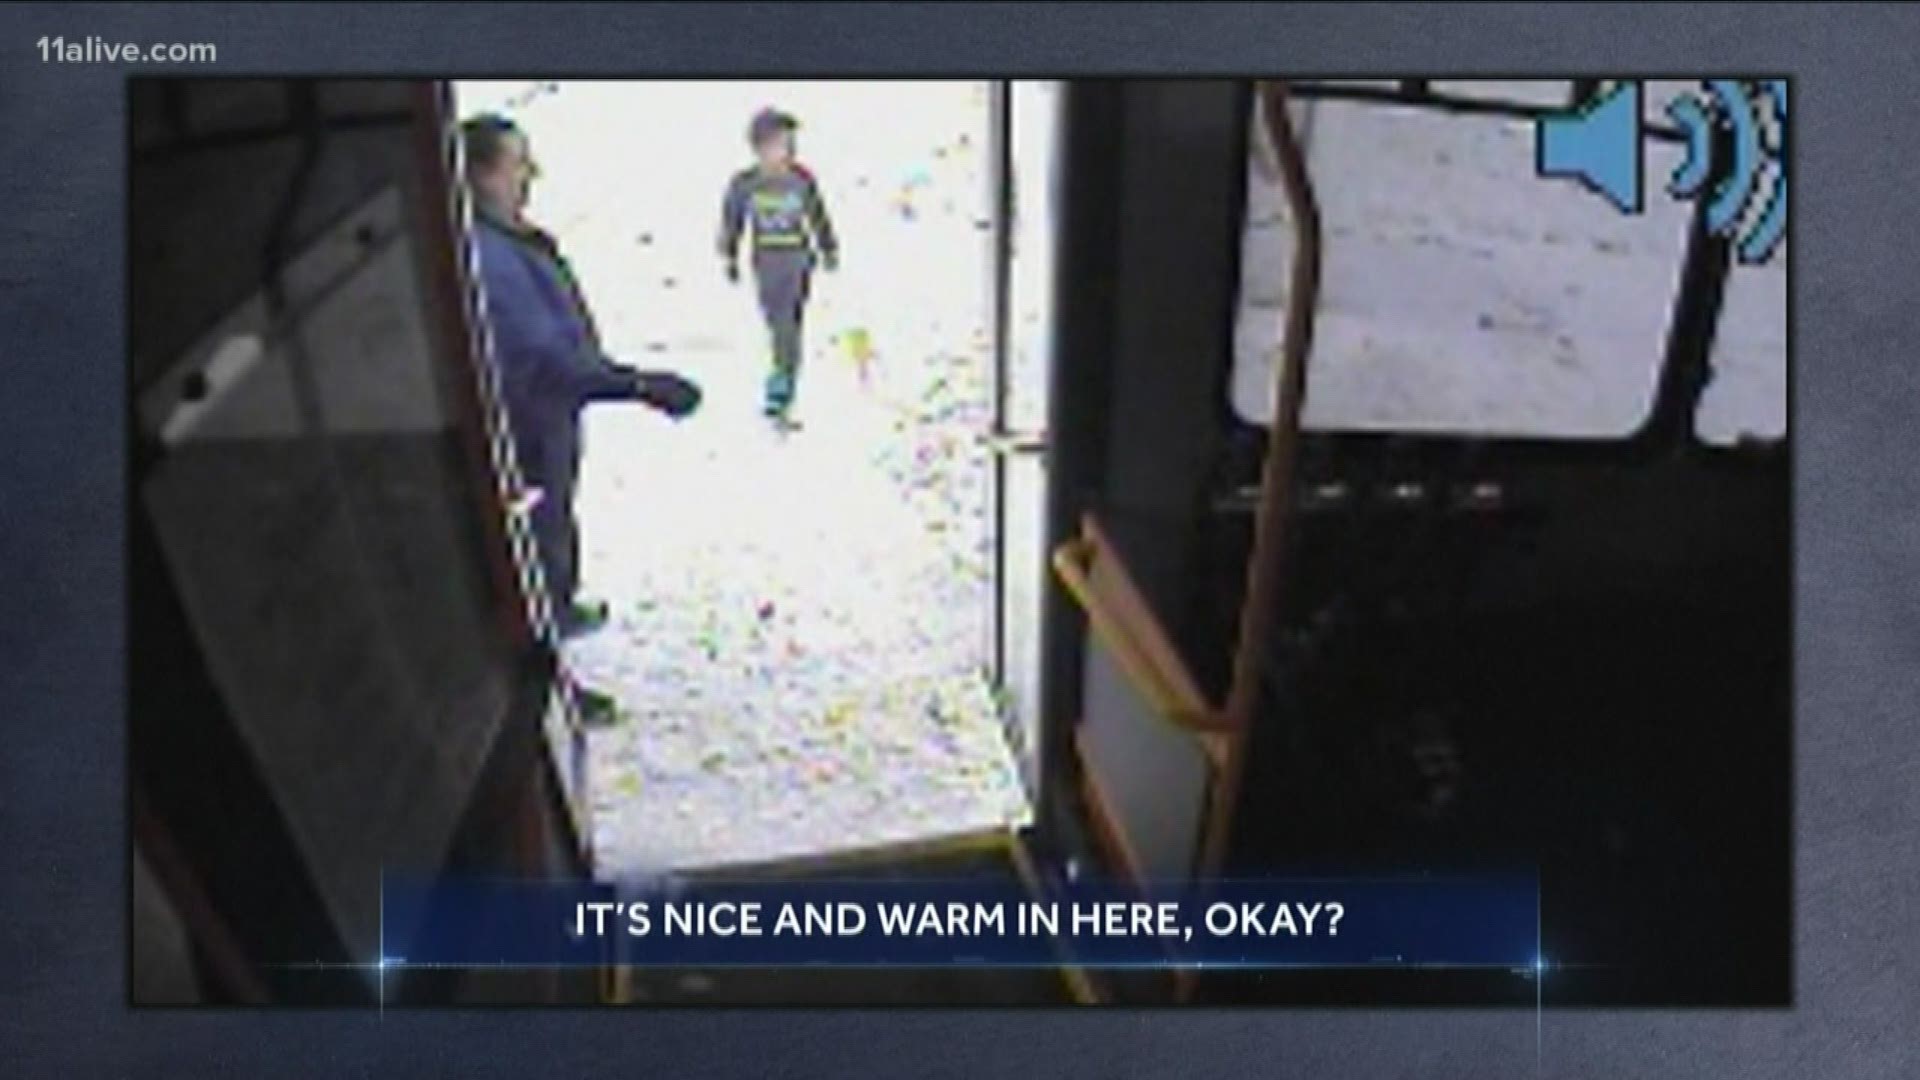 One bus driver saved children from freezing temps